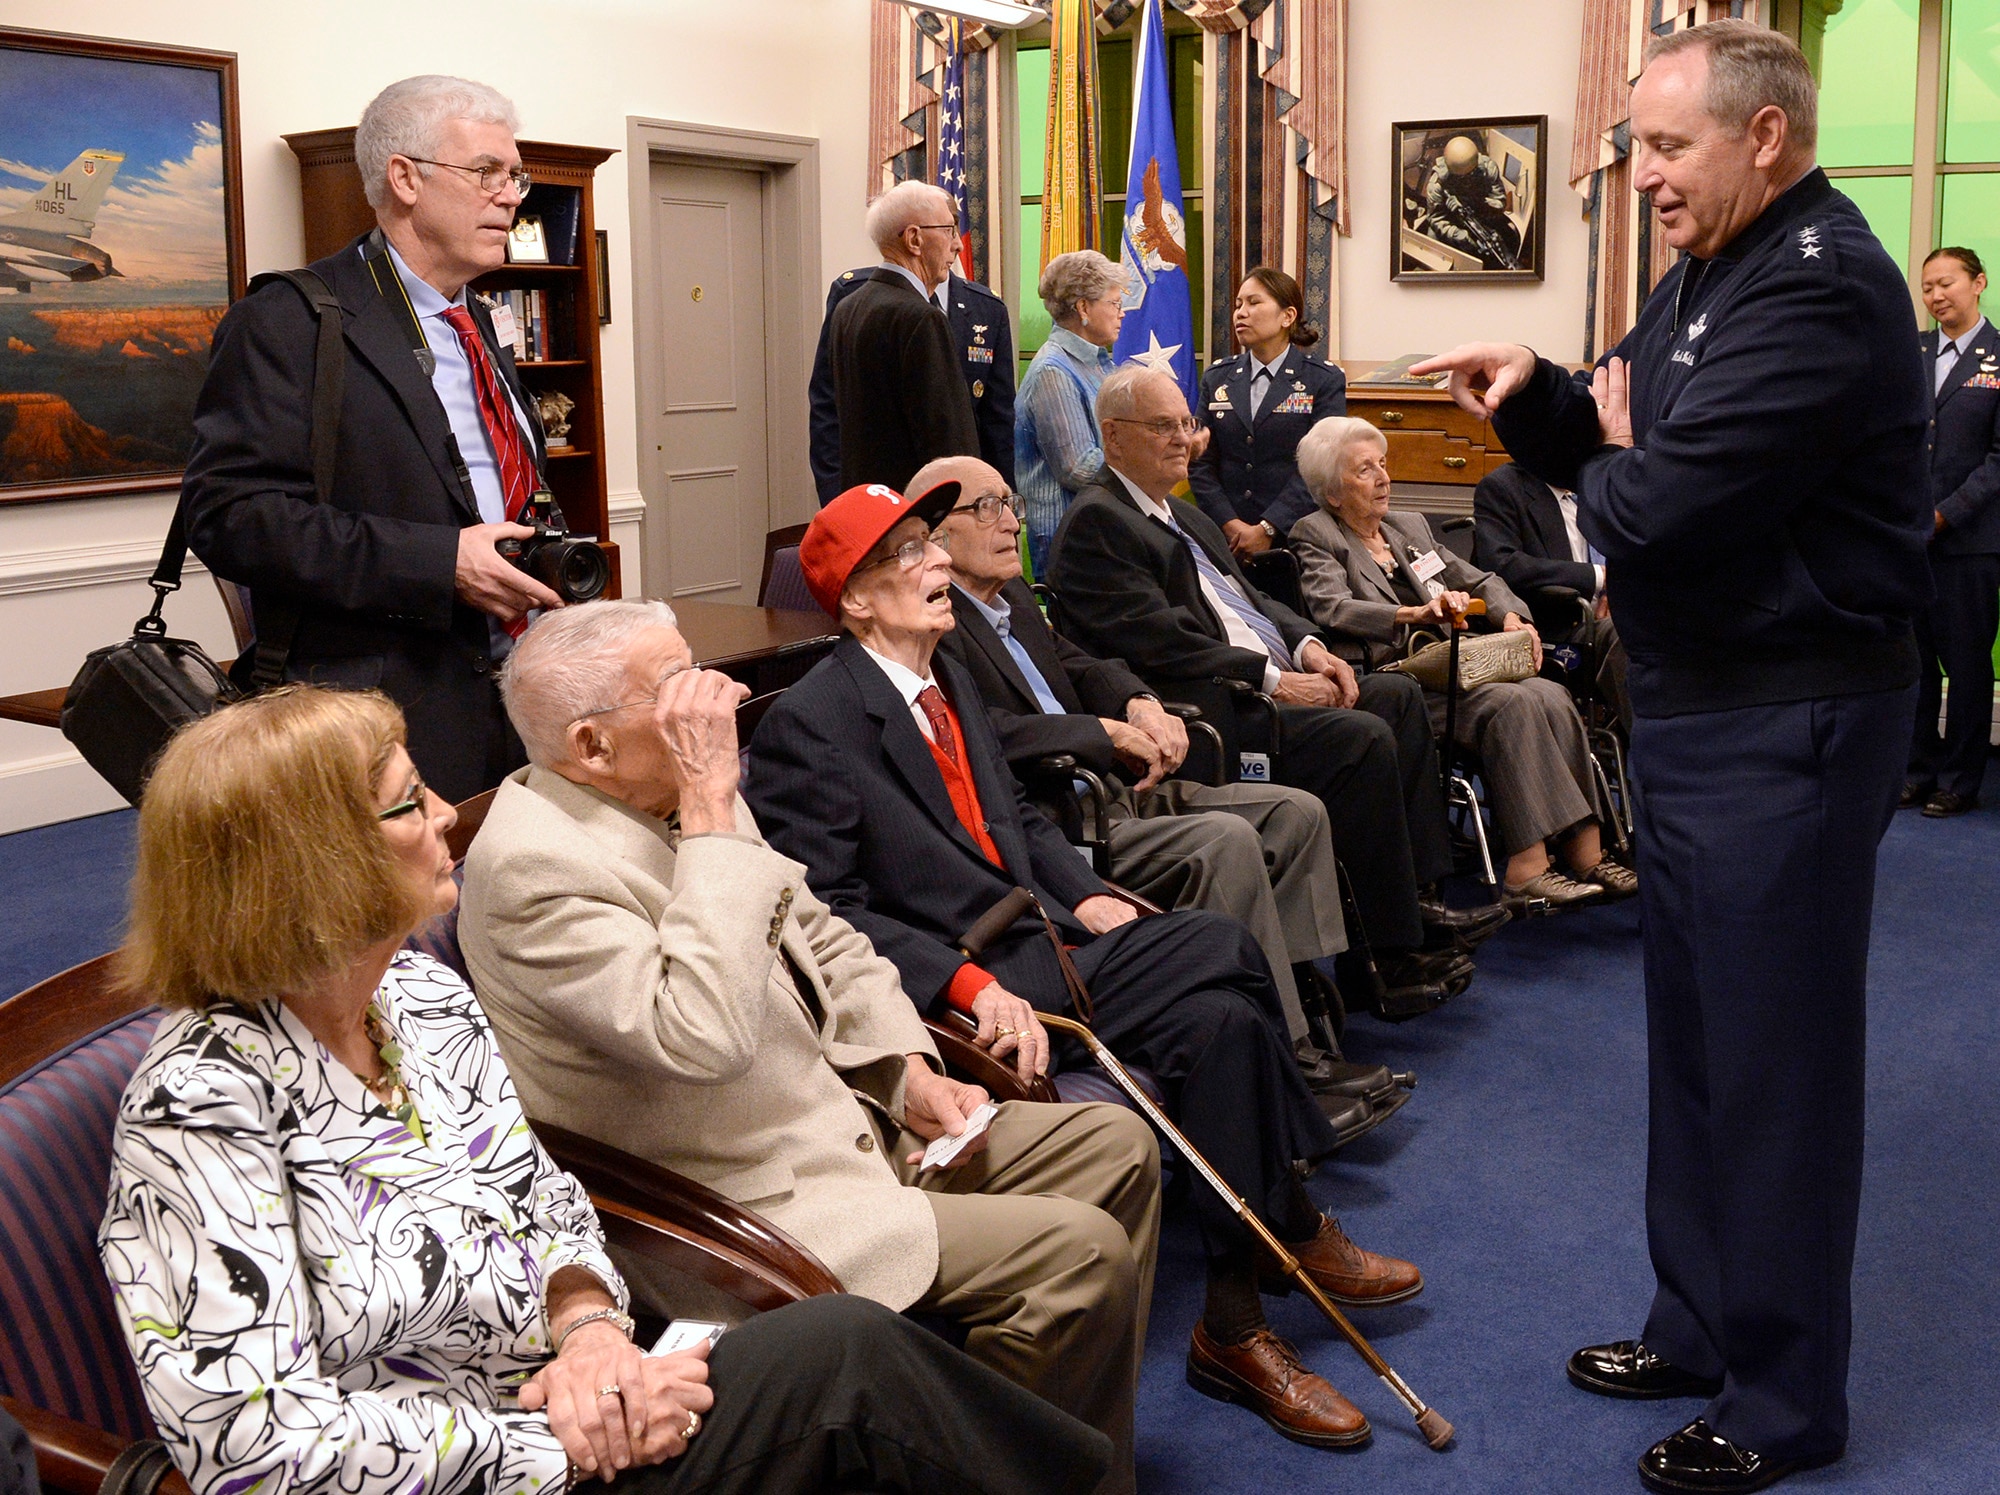 Air Force Chief of Staff Gen. Mark A. Welsh III (right) hosted an office call for Army Air Corps veterans and family members before presenting them with the Prisoner of War Medal during a ceremony April 30, 2014, in the Pentagon, Washington, D.C. The nine aviators served in World War II as bomber crew members and were shot down flying missions over Germany and were held in a prison camp in Wauwilermoos, Switzerland. U.S. Army Maj. Dwight Mears, whose grandfather Lt. George Mears, who was also held at the prison, fought diligently for 15 years to get the men recognized as POWs. (U.S. Air Force photo/Andy Morataya)